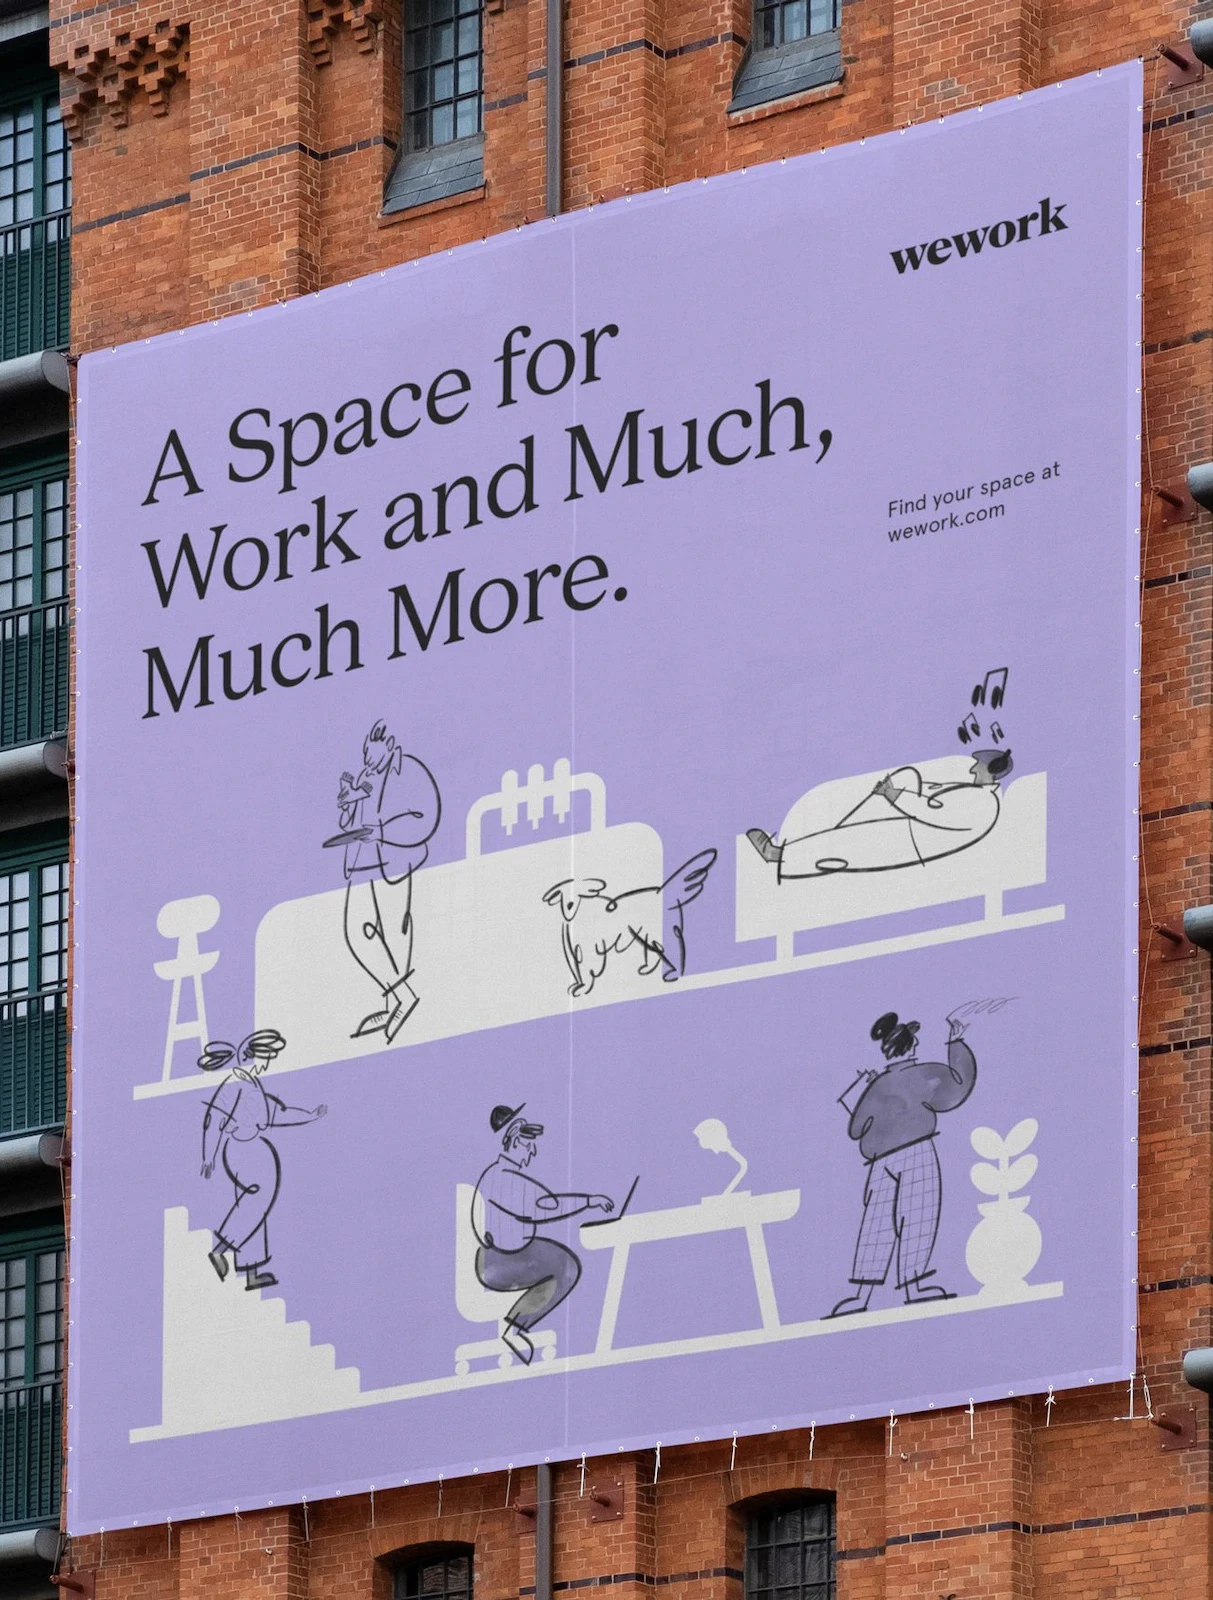 Franklyn’s illustration system for WeWork places customers at the forefront.